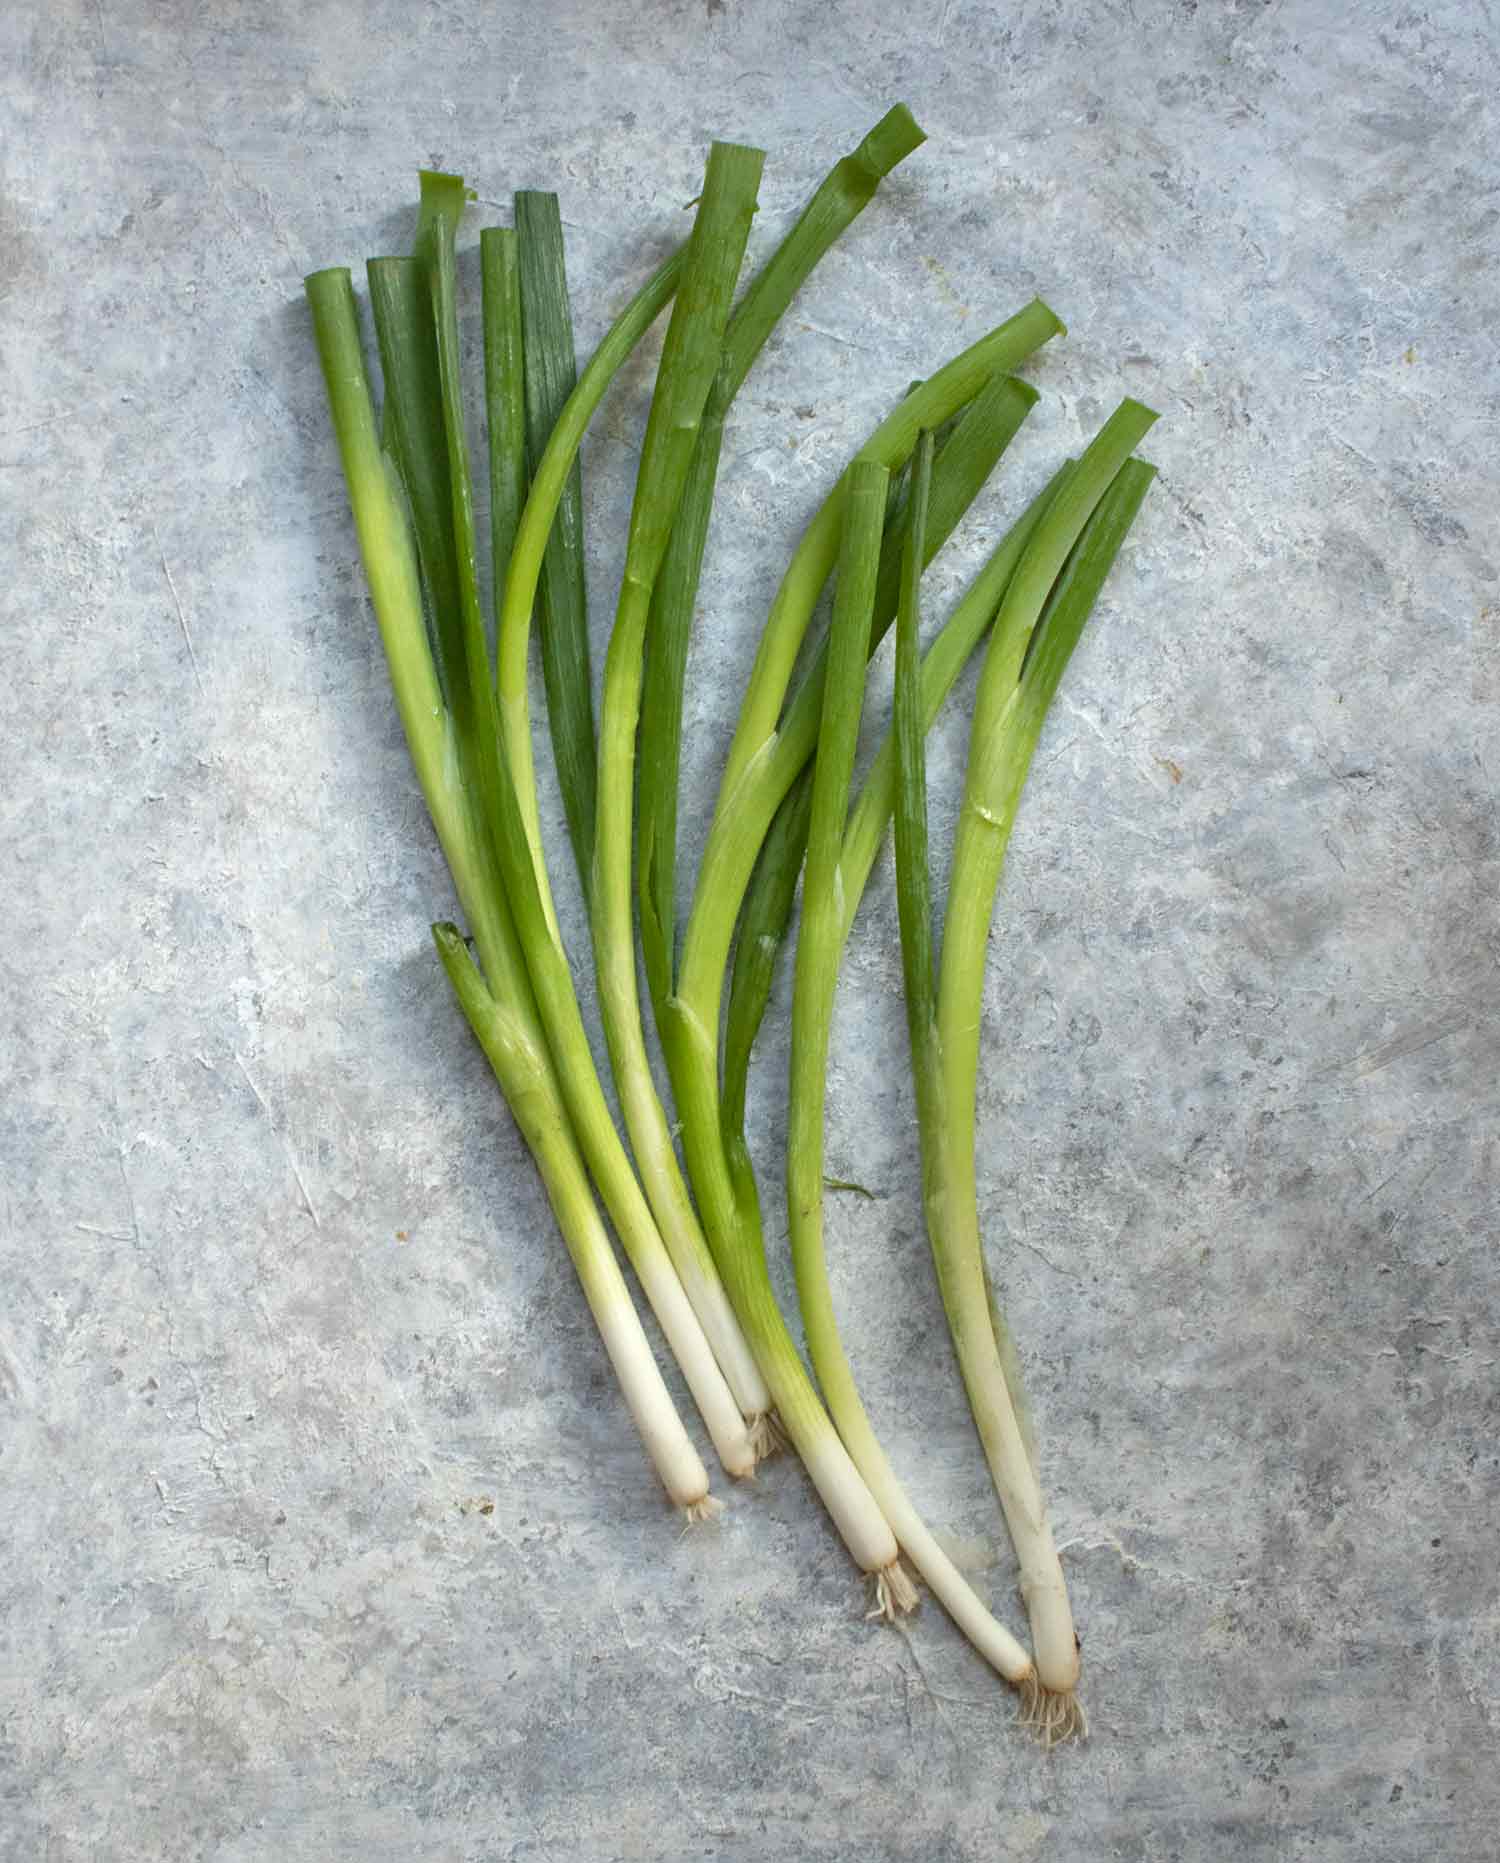 Six scallions lying side by side, ready to chop.